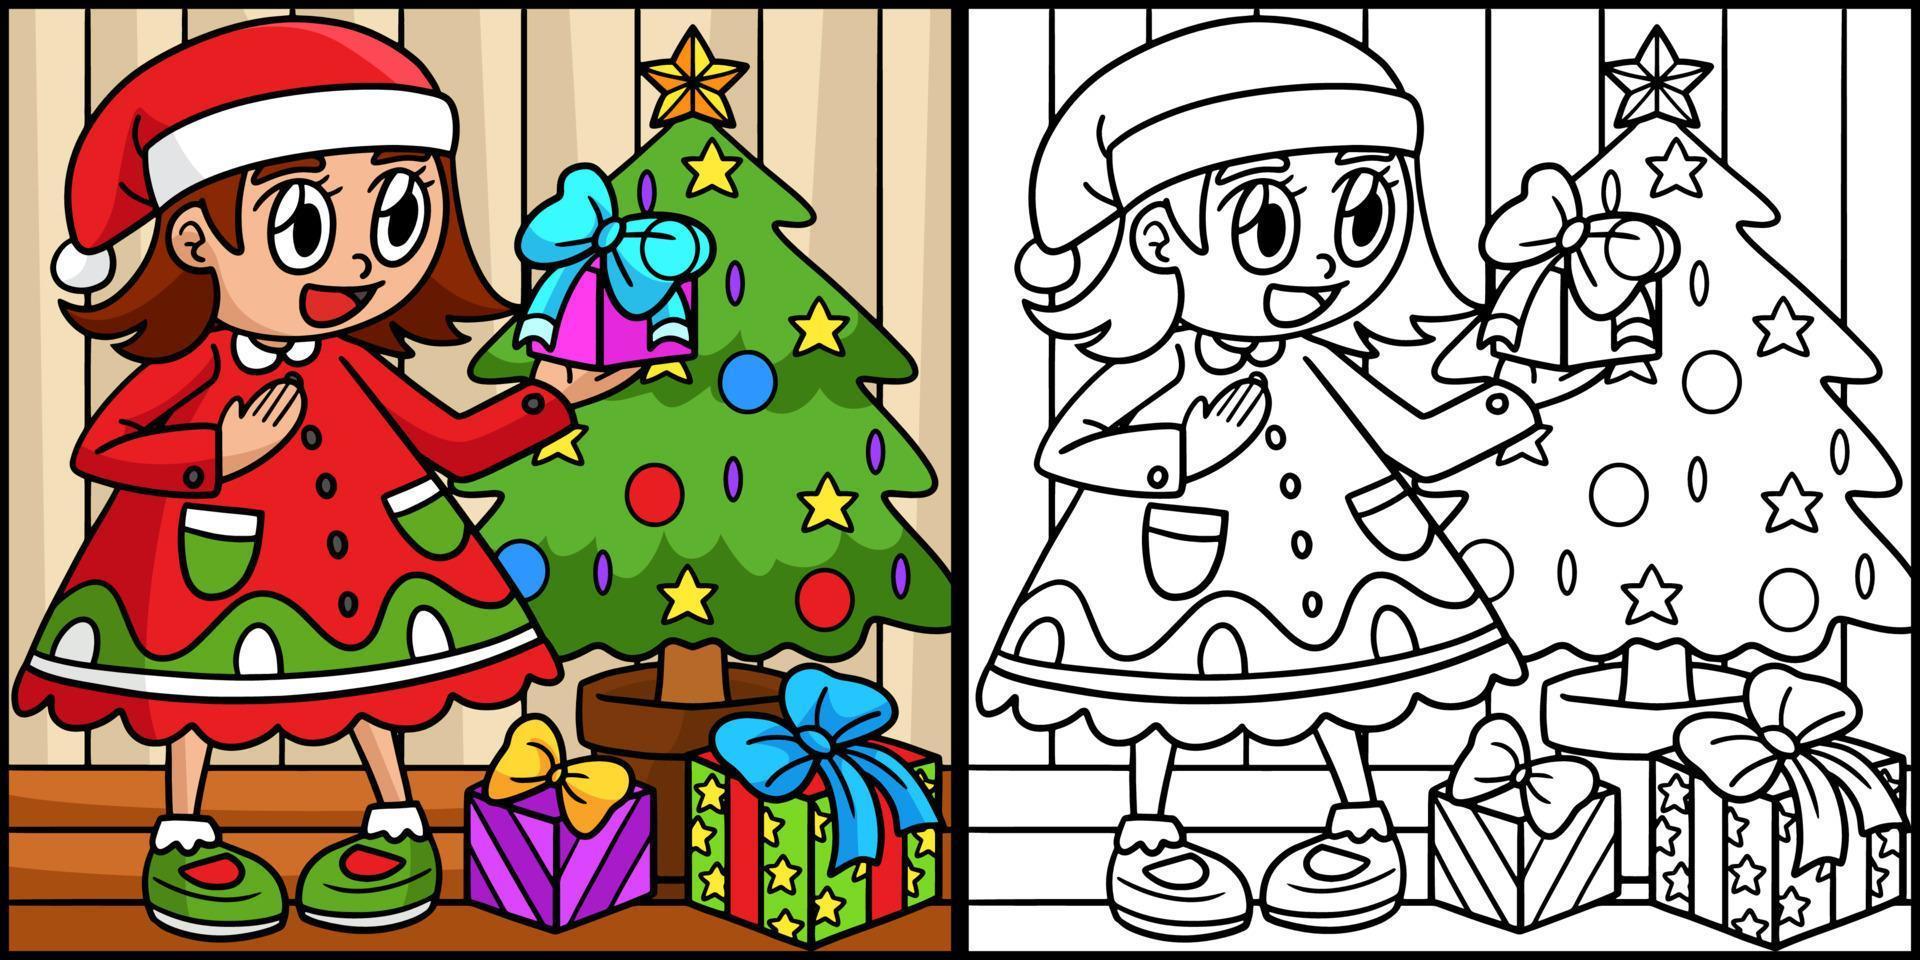 Gift And Christmas Tree Coloring Page Illustration vector